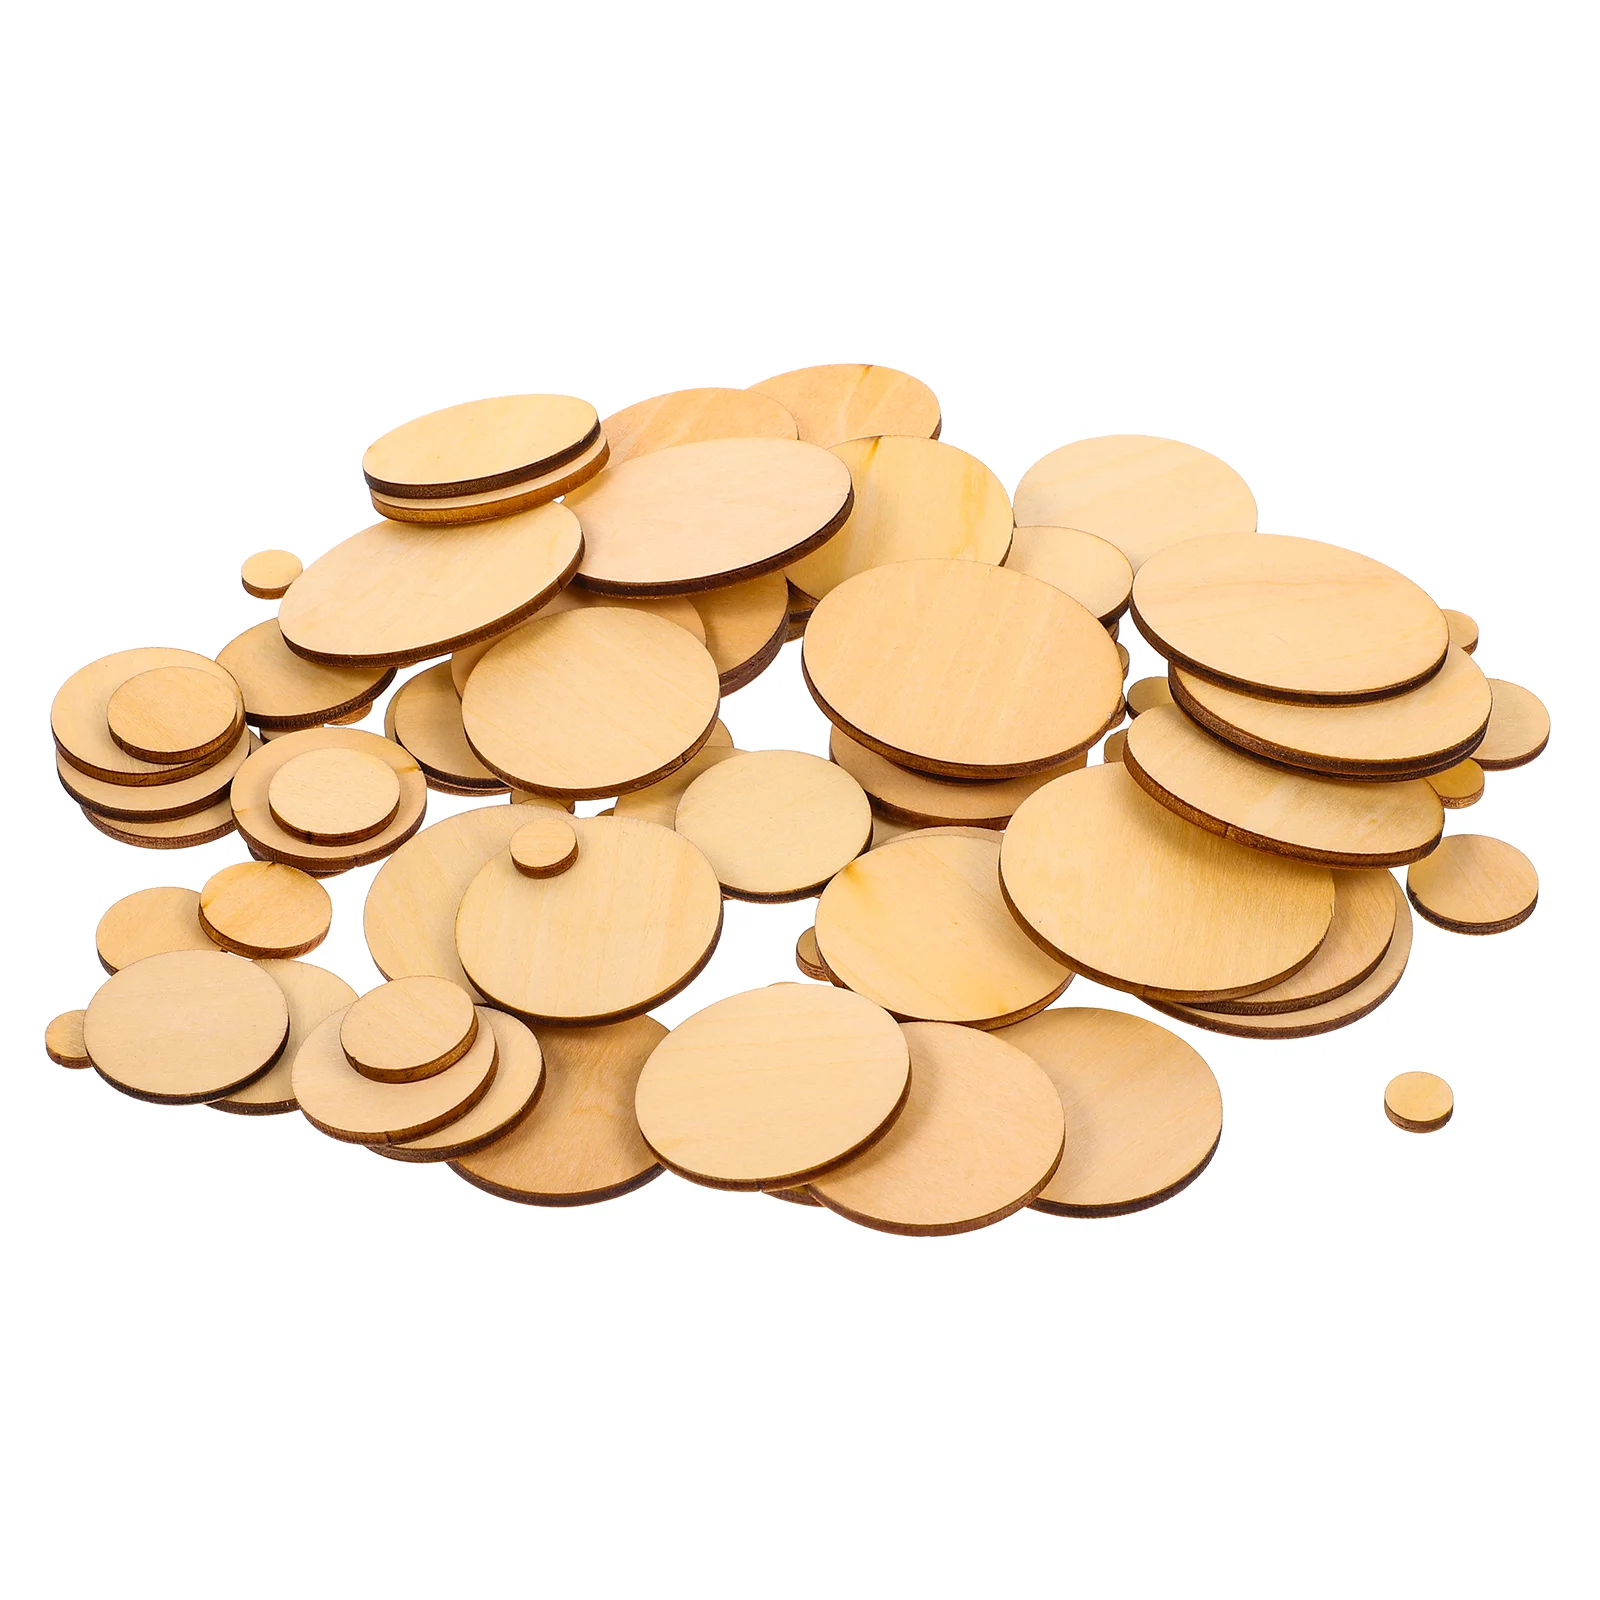 

Wood Circles Wooden Christmas Unfinished Cutouts Round Shapes Tags Gift Crafts Rounds Slices Blank Discs Holesembellishment